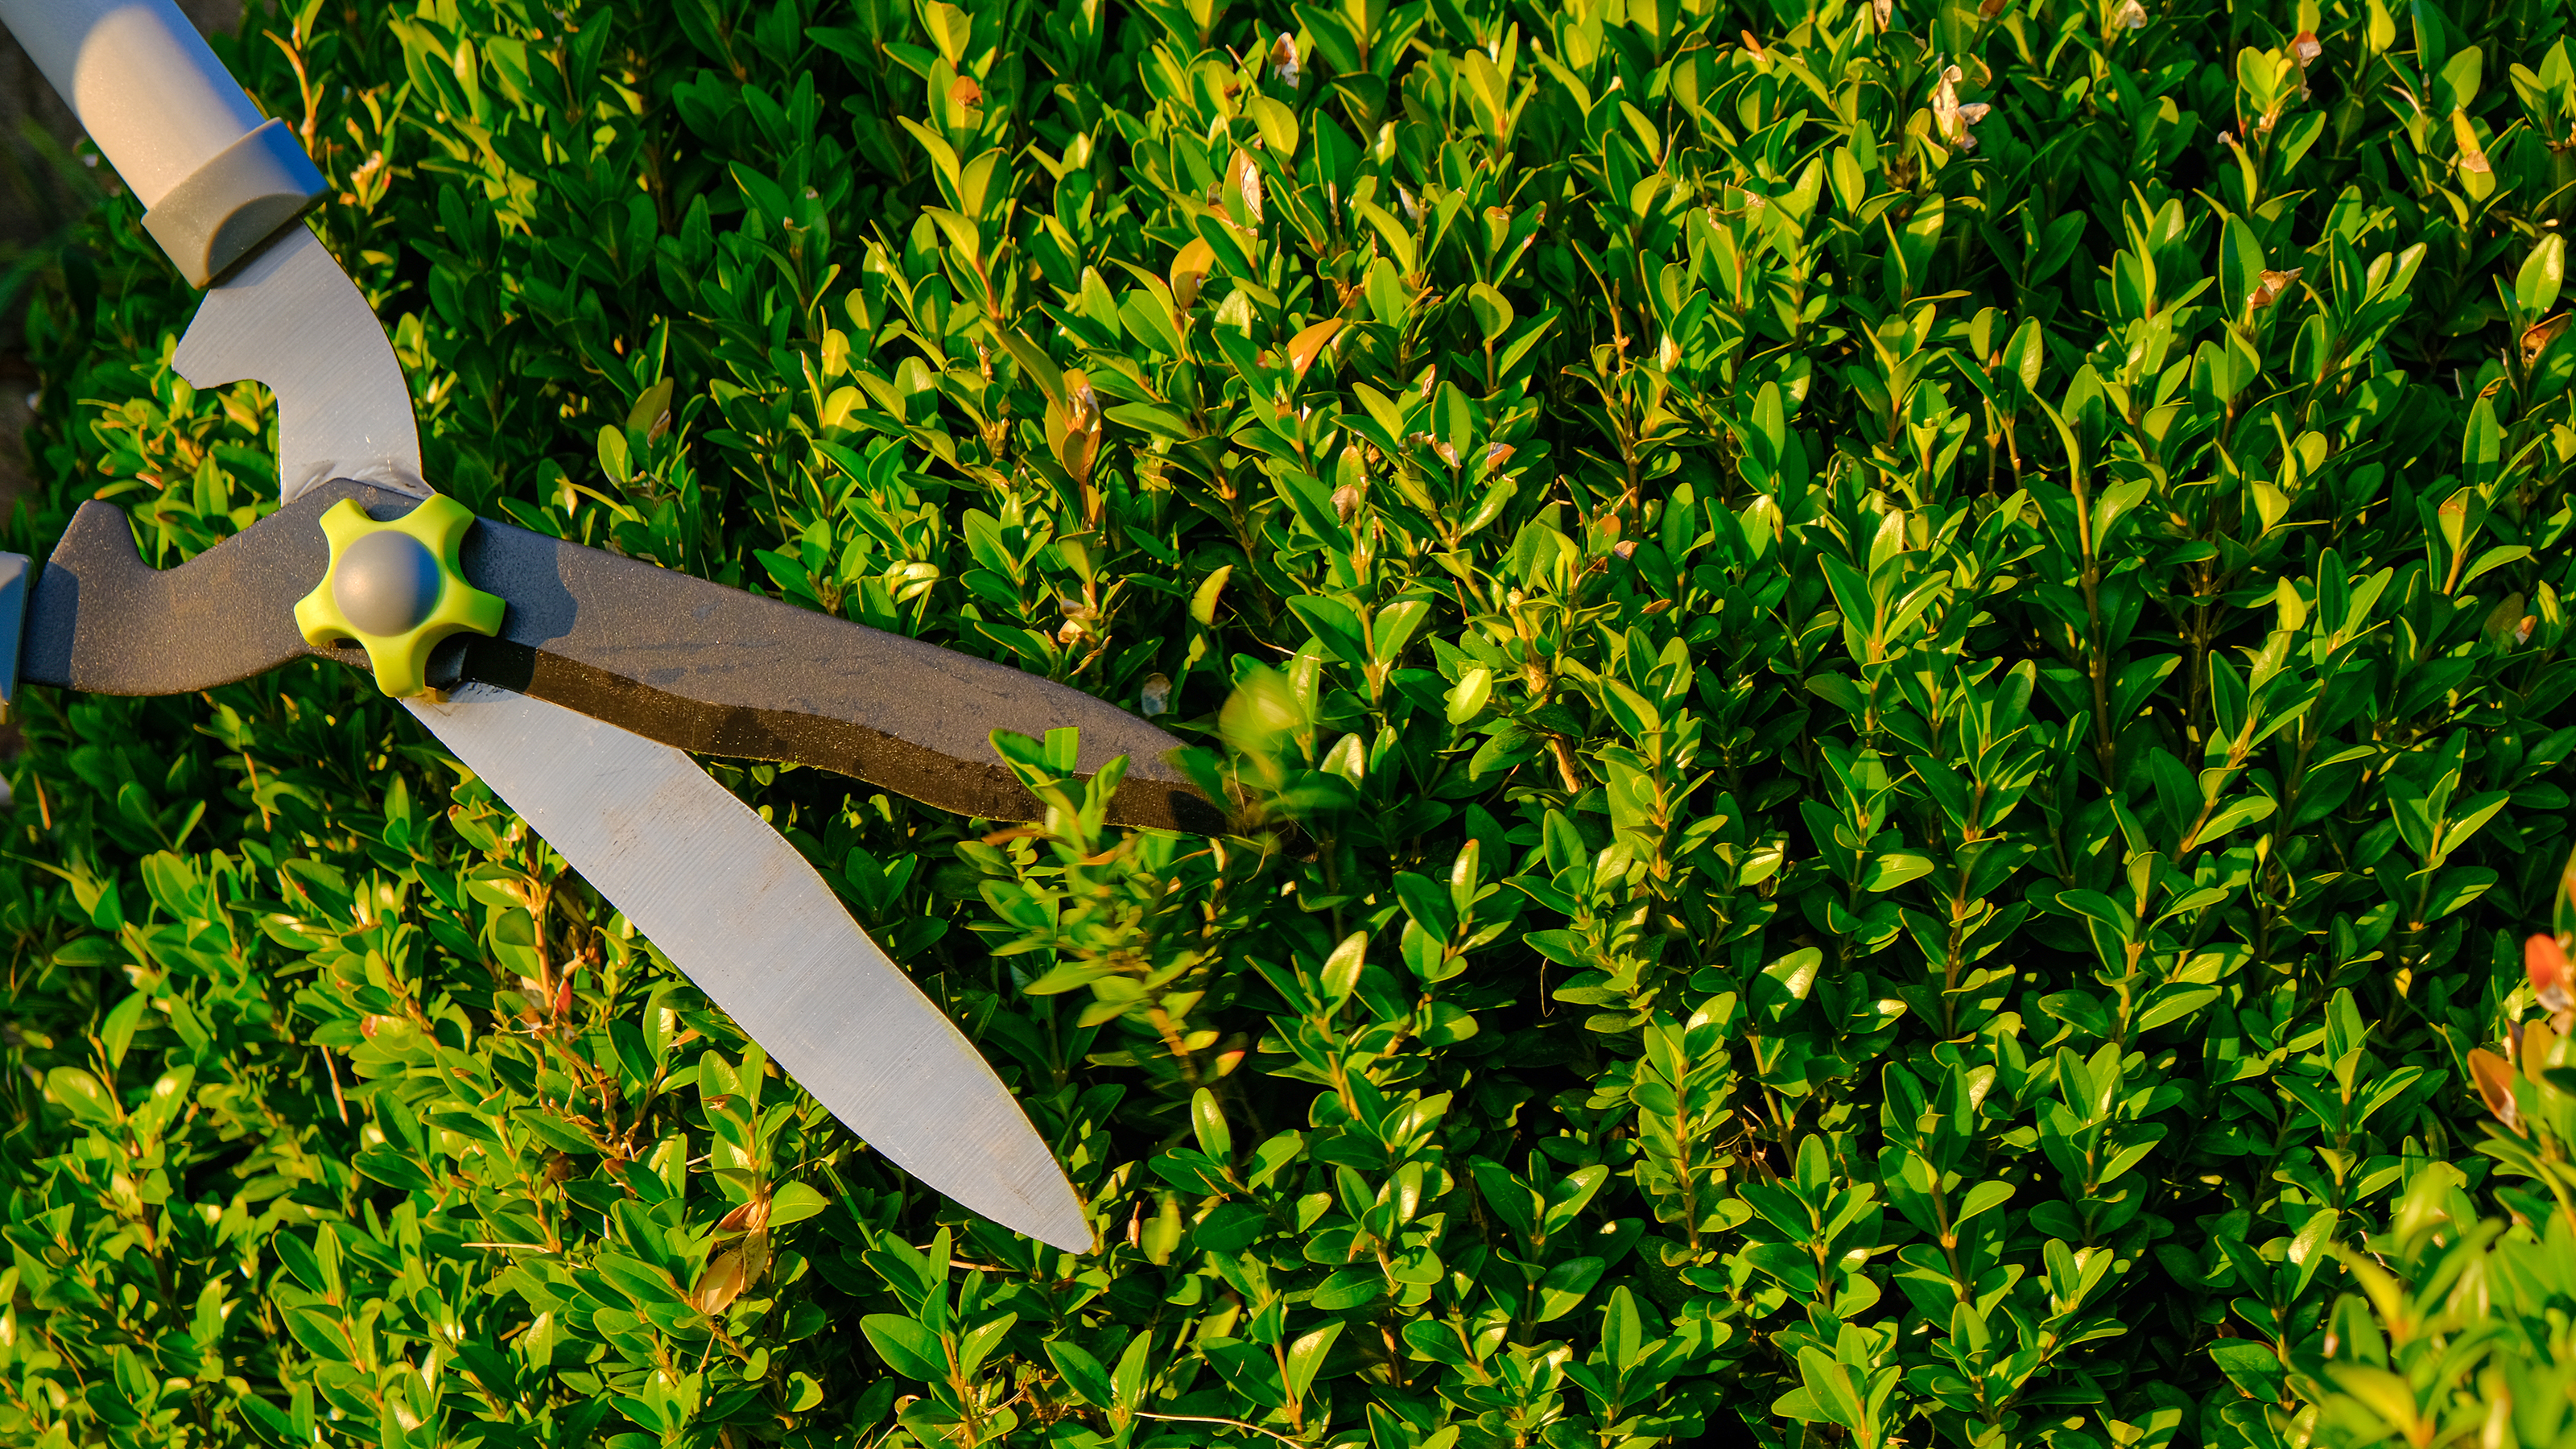 3 Uses For Hedge Shears In Your Garden